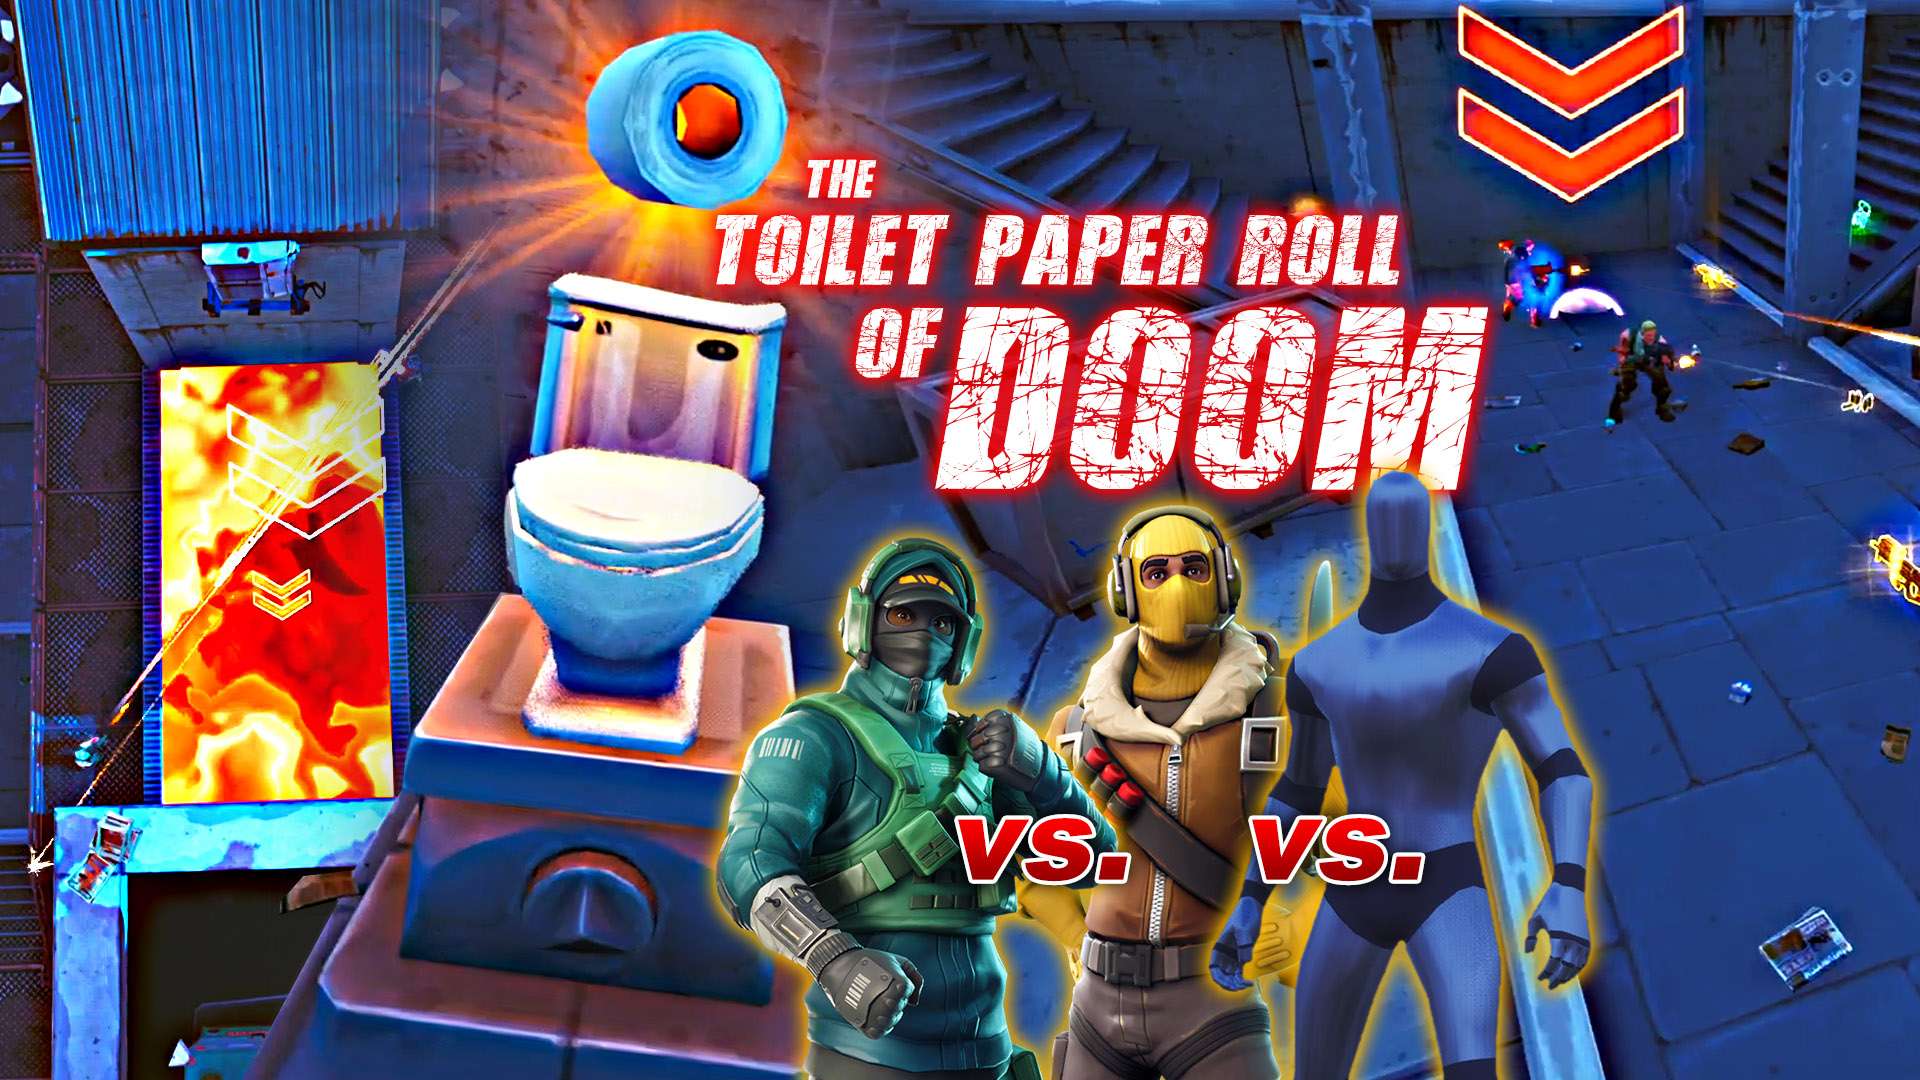 THE TOILET PAPER OF DOOM COMPETITION